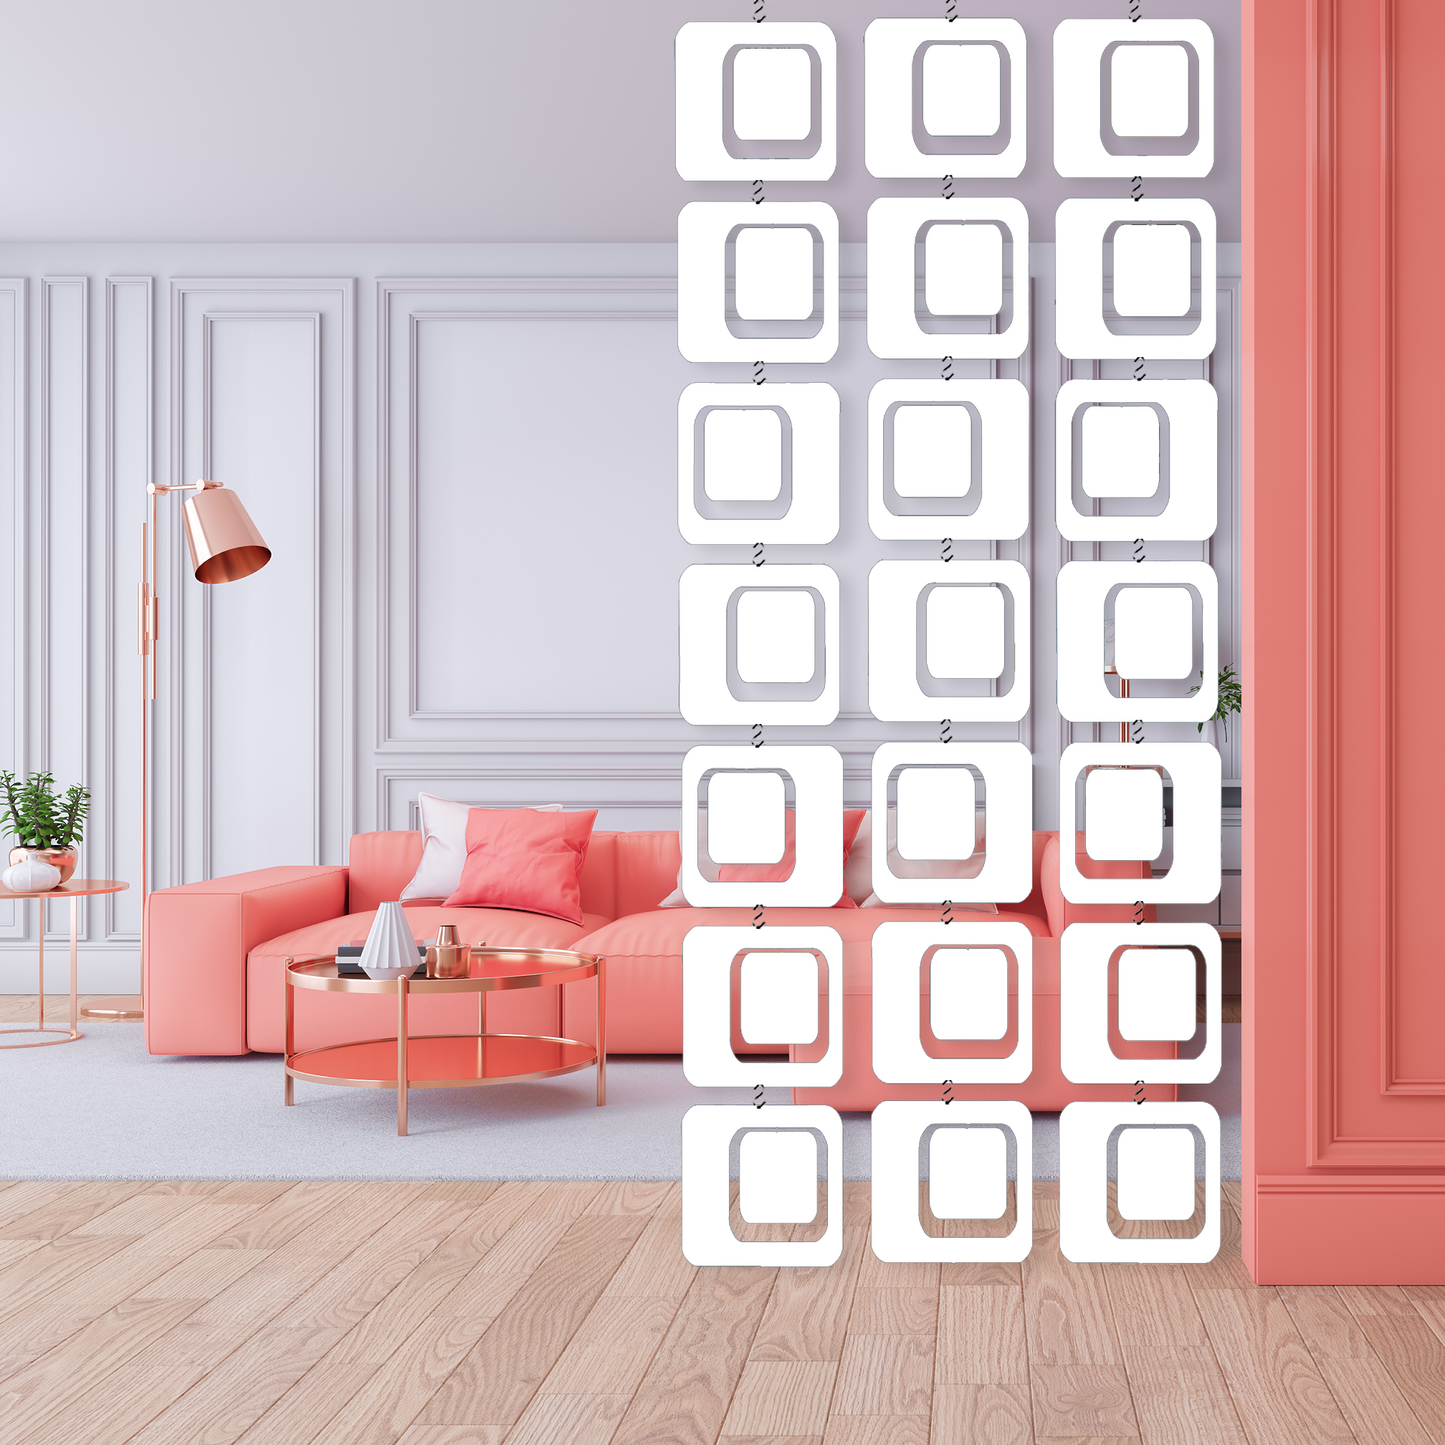 XL Dramatic White Coolsville XL room divider in peach pink colored living room by AtomicMobiles.com